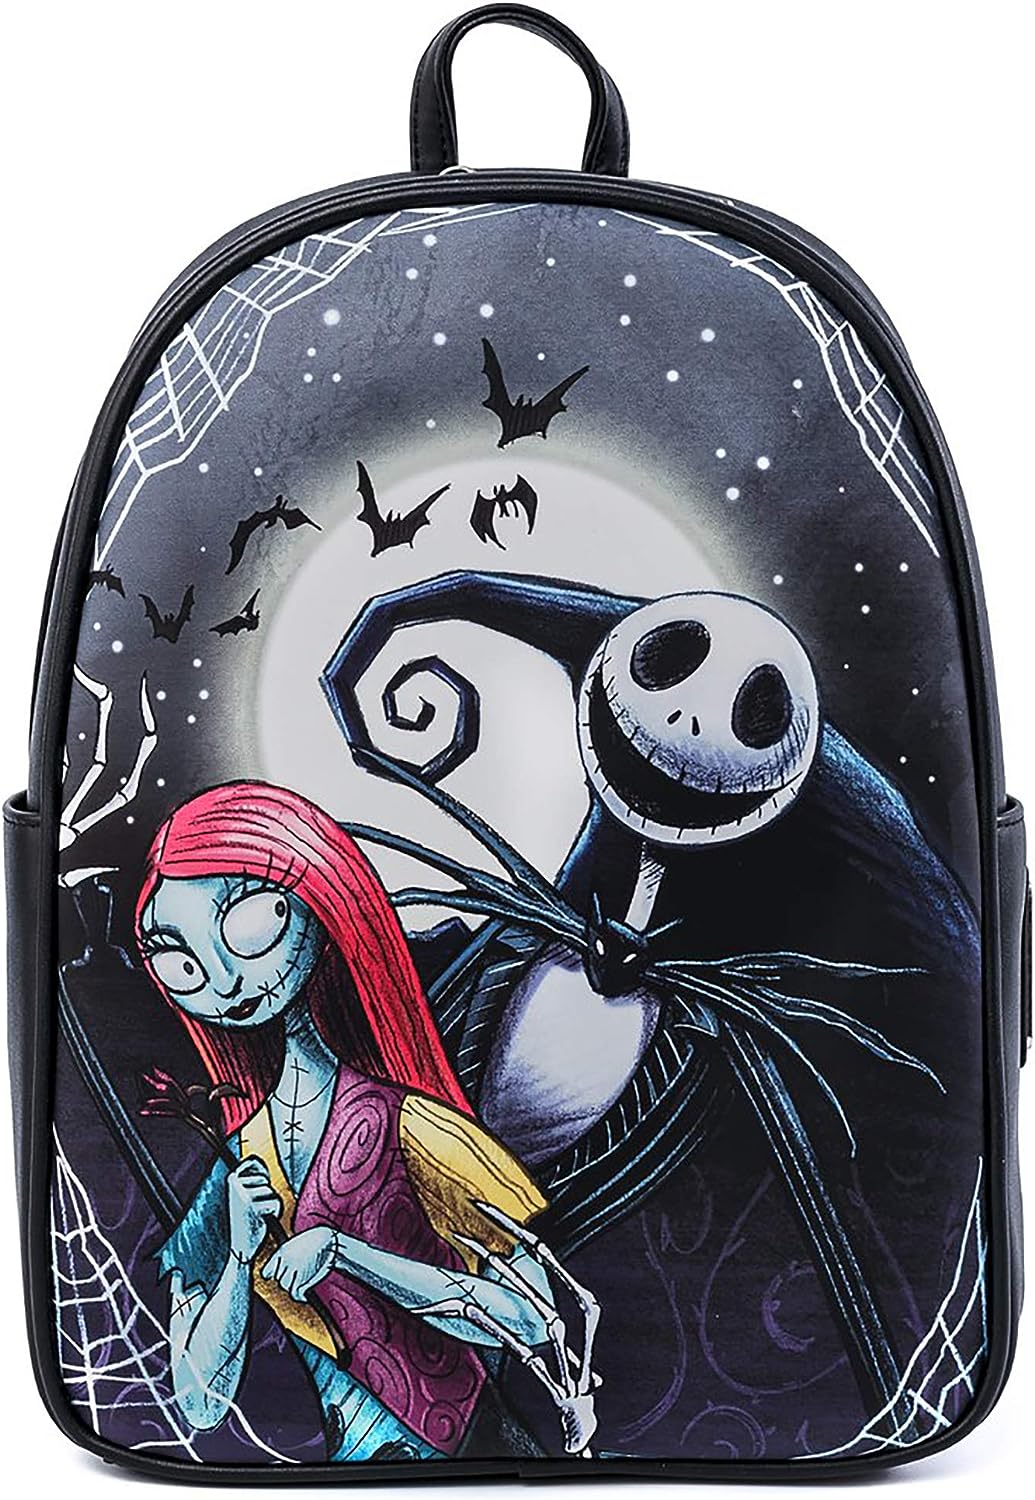 Loungefly Mini Backpack Disney Nightmare Before Christmas Simply Meant to Be Jack Skellington and Sally Halloween